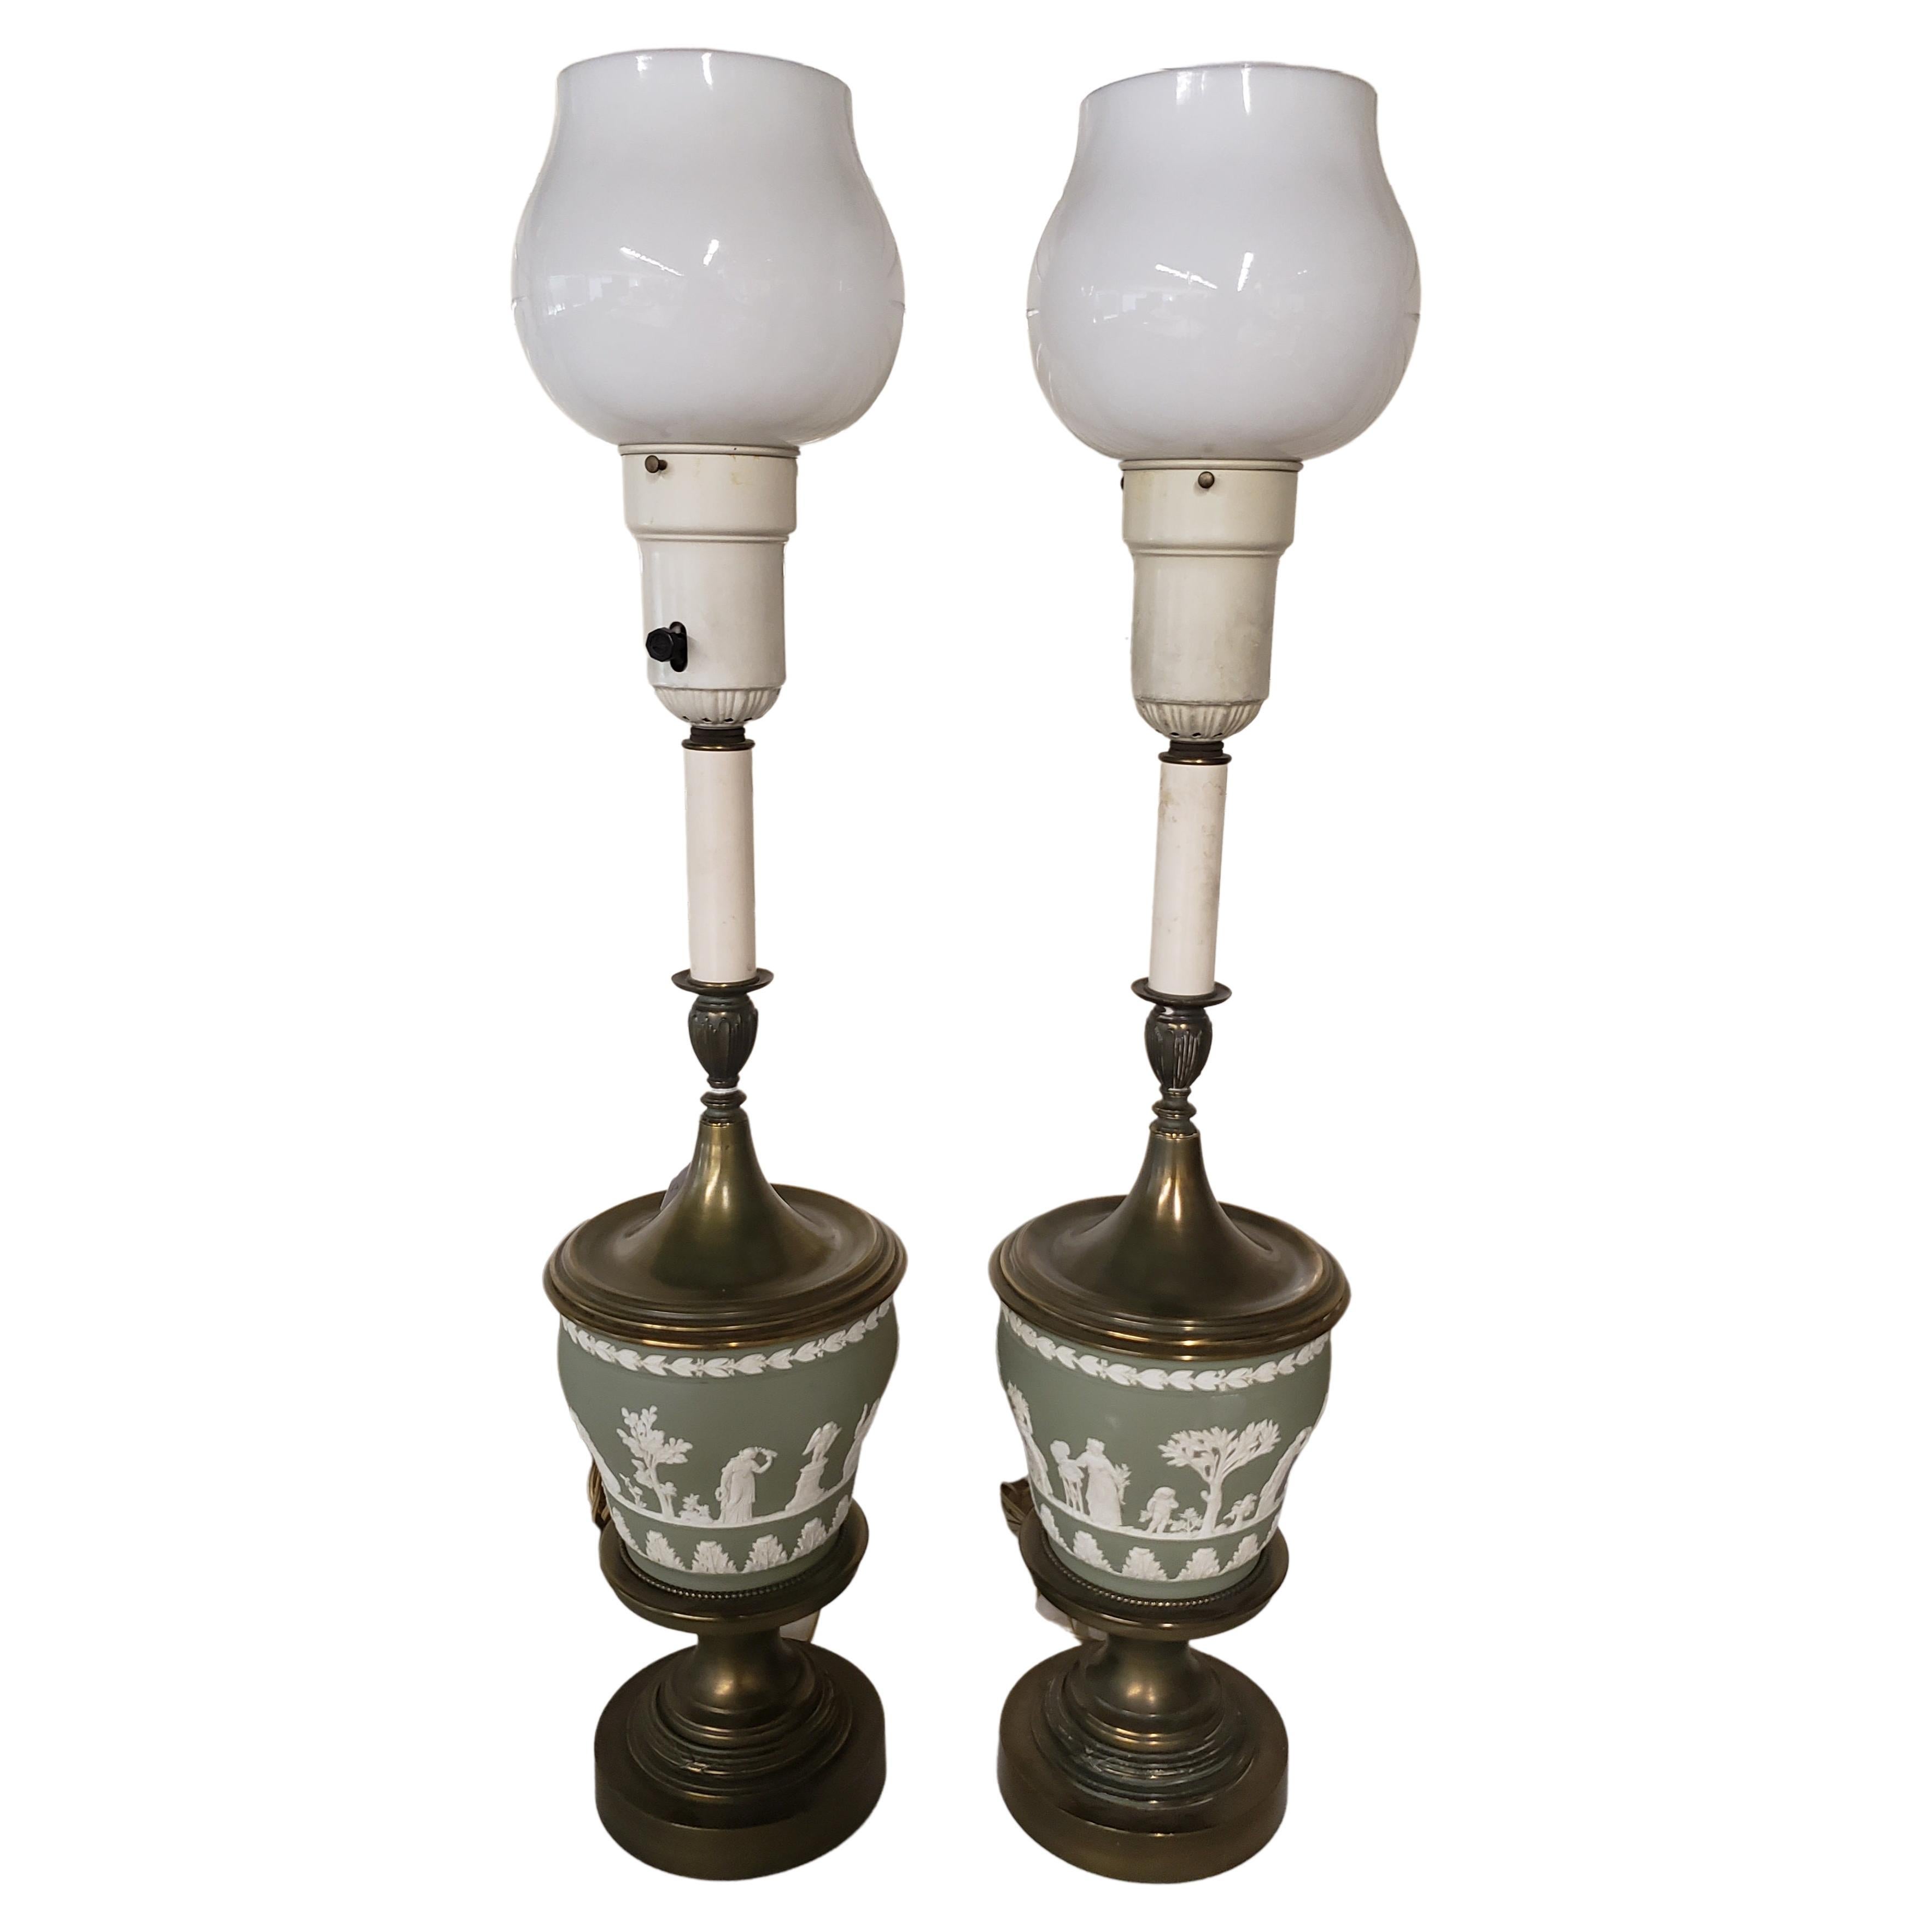 A very rare pair of green /turquoise Wedgewood jasperware torchiere table lamps. Come with glass shades
Measure 7.5 inches in diameter and stand 33